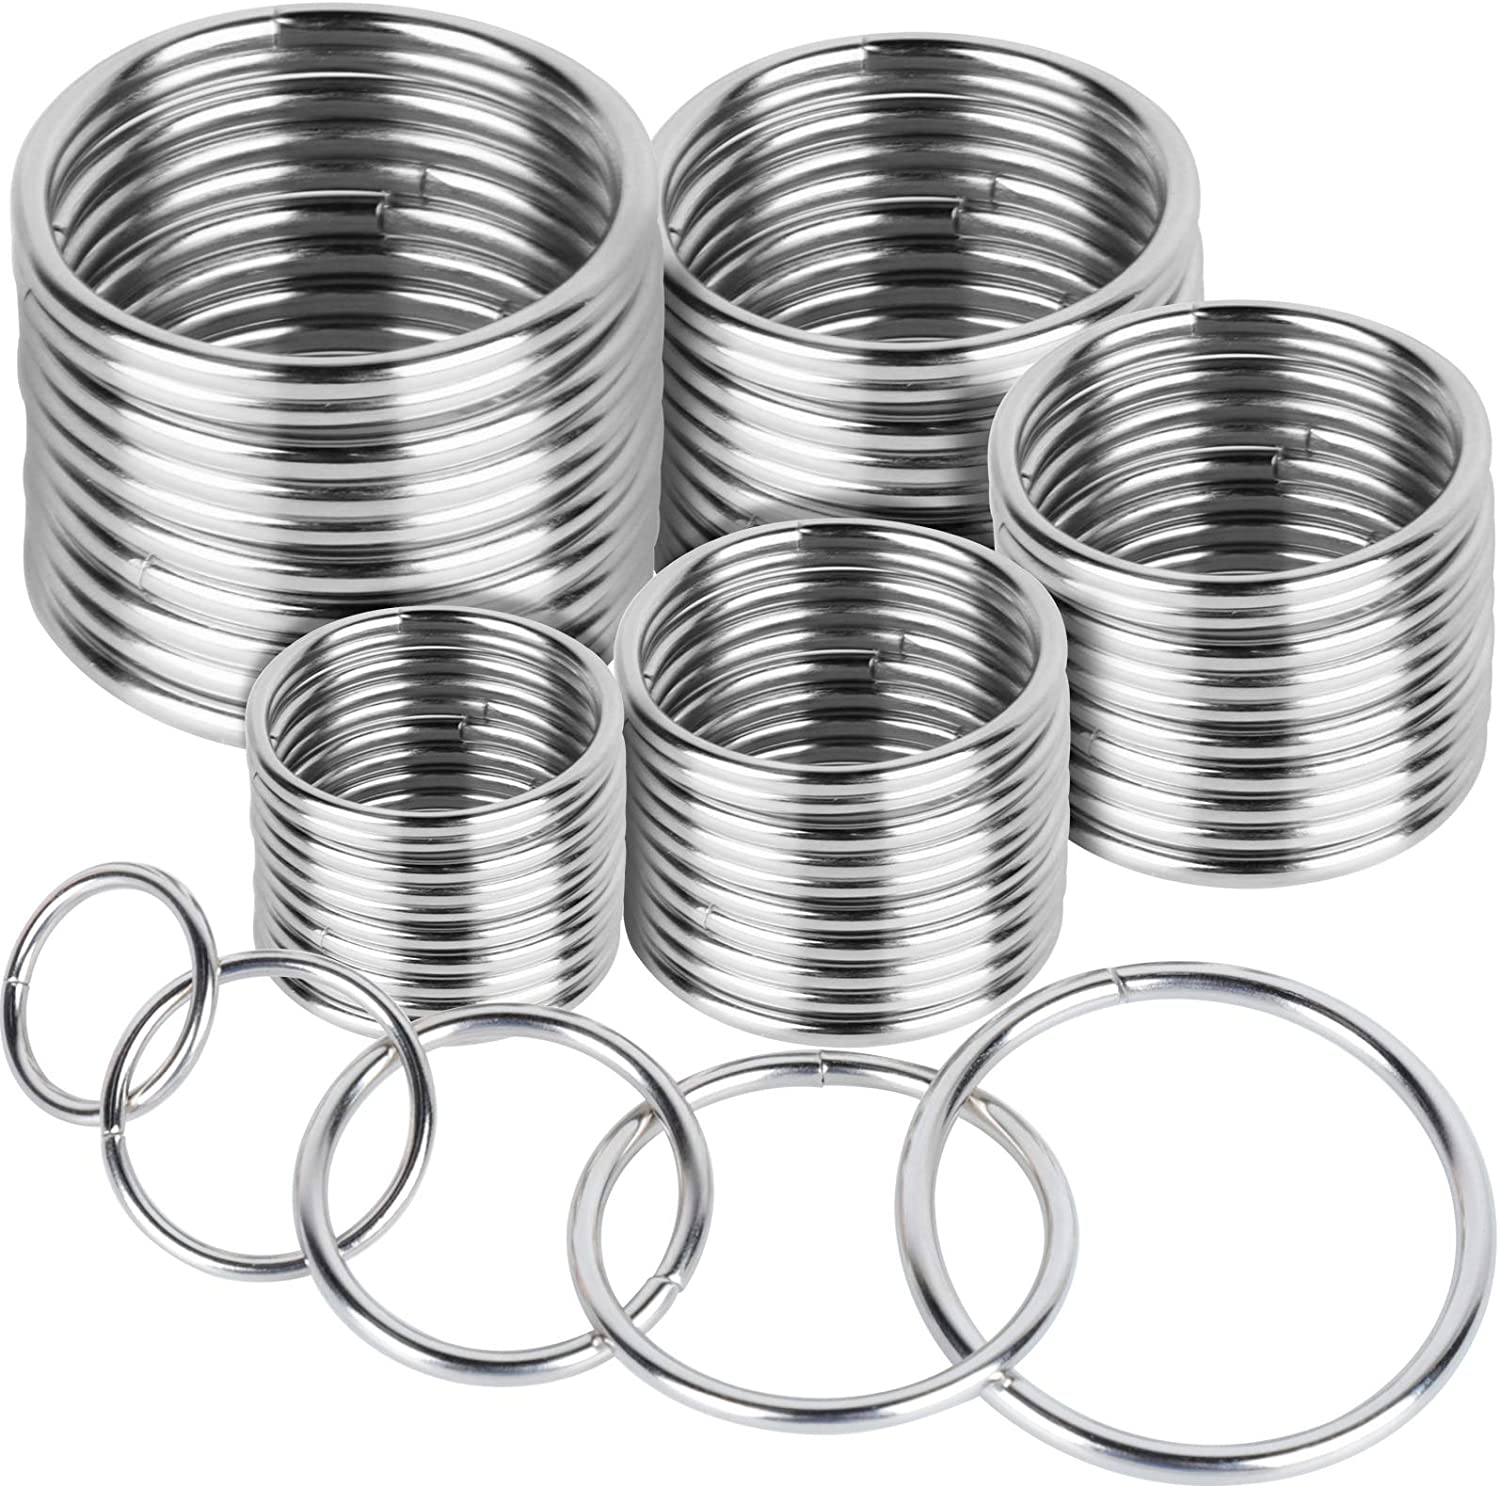 FANDAMEI 50 Pcs Silver Multi-Purpose Metal O Ring Non-Welded O Ring for Macrame, Camping Belt, Dog Leashes, Hardware, Bags and More Craft Project - 16mm, 21mm, 25mm, 32mm, 38mm